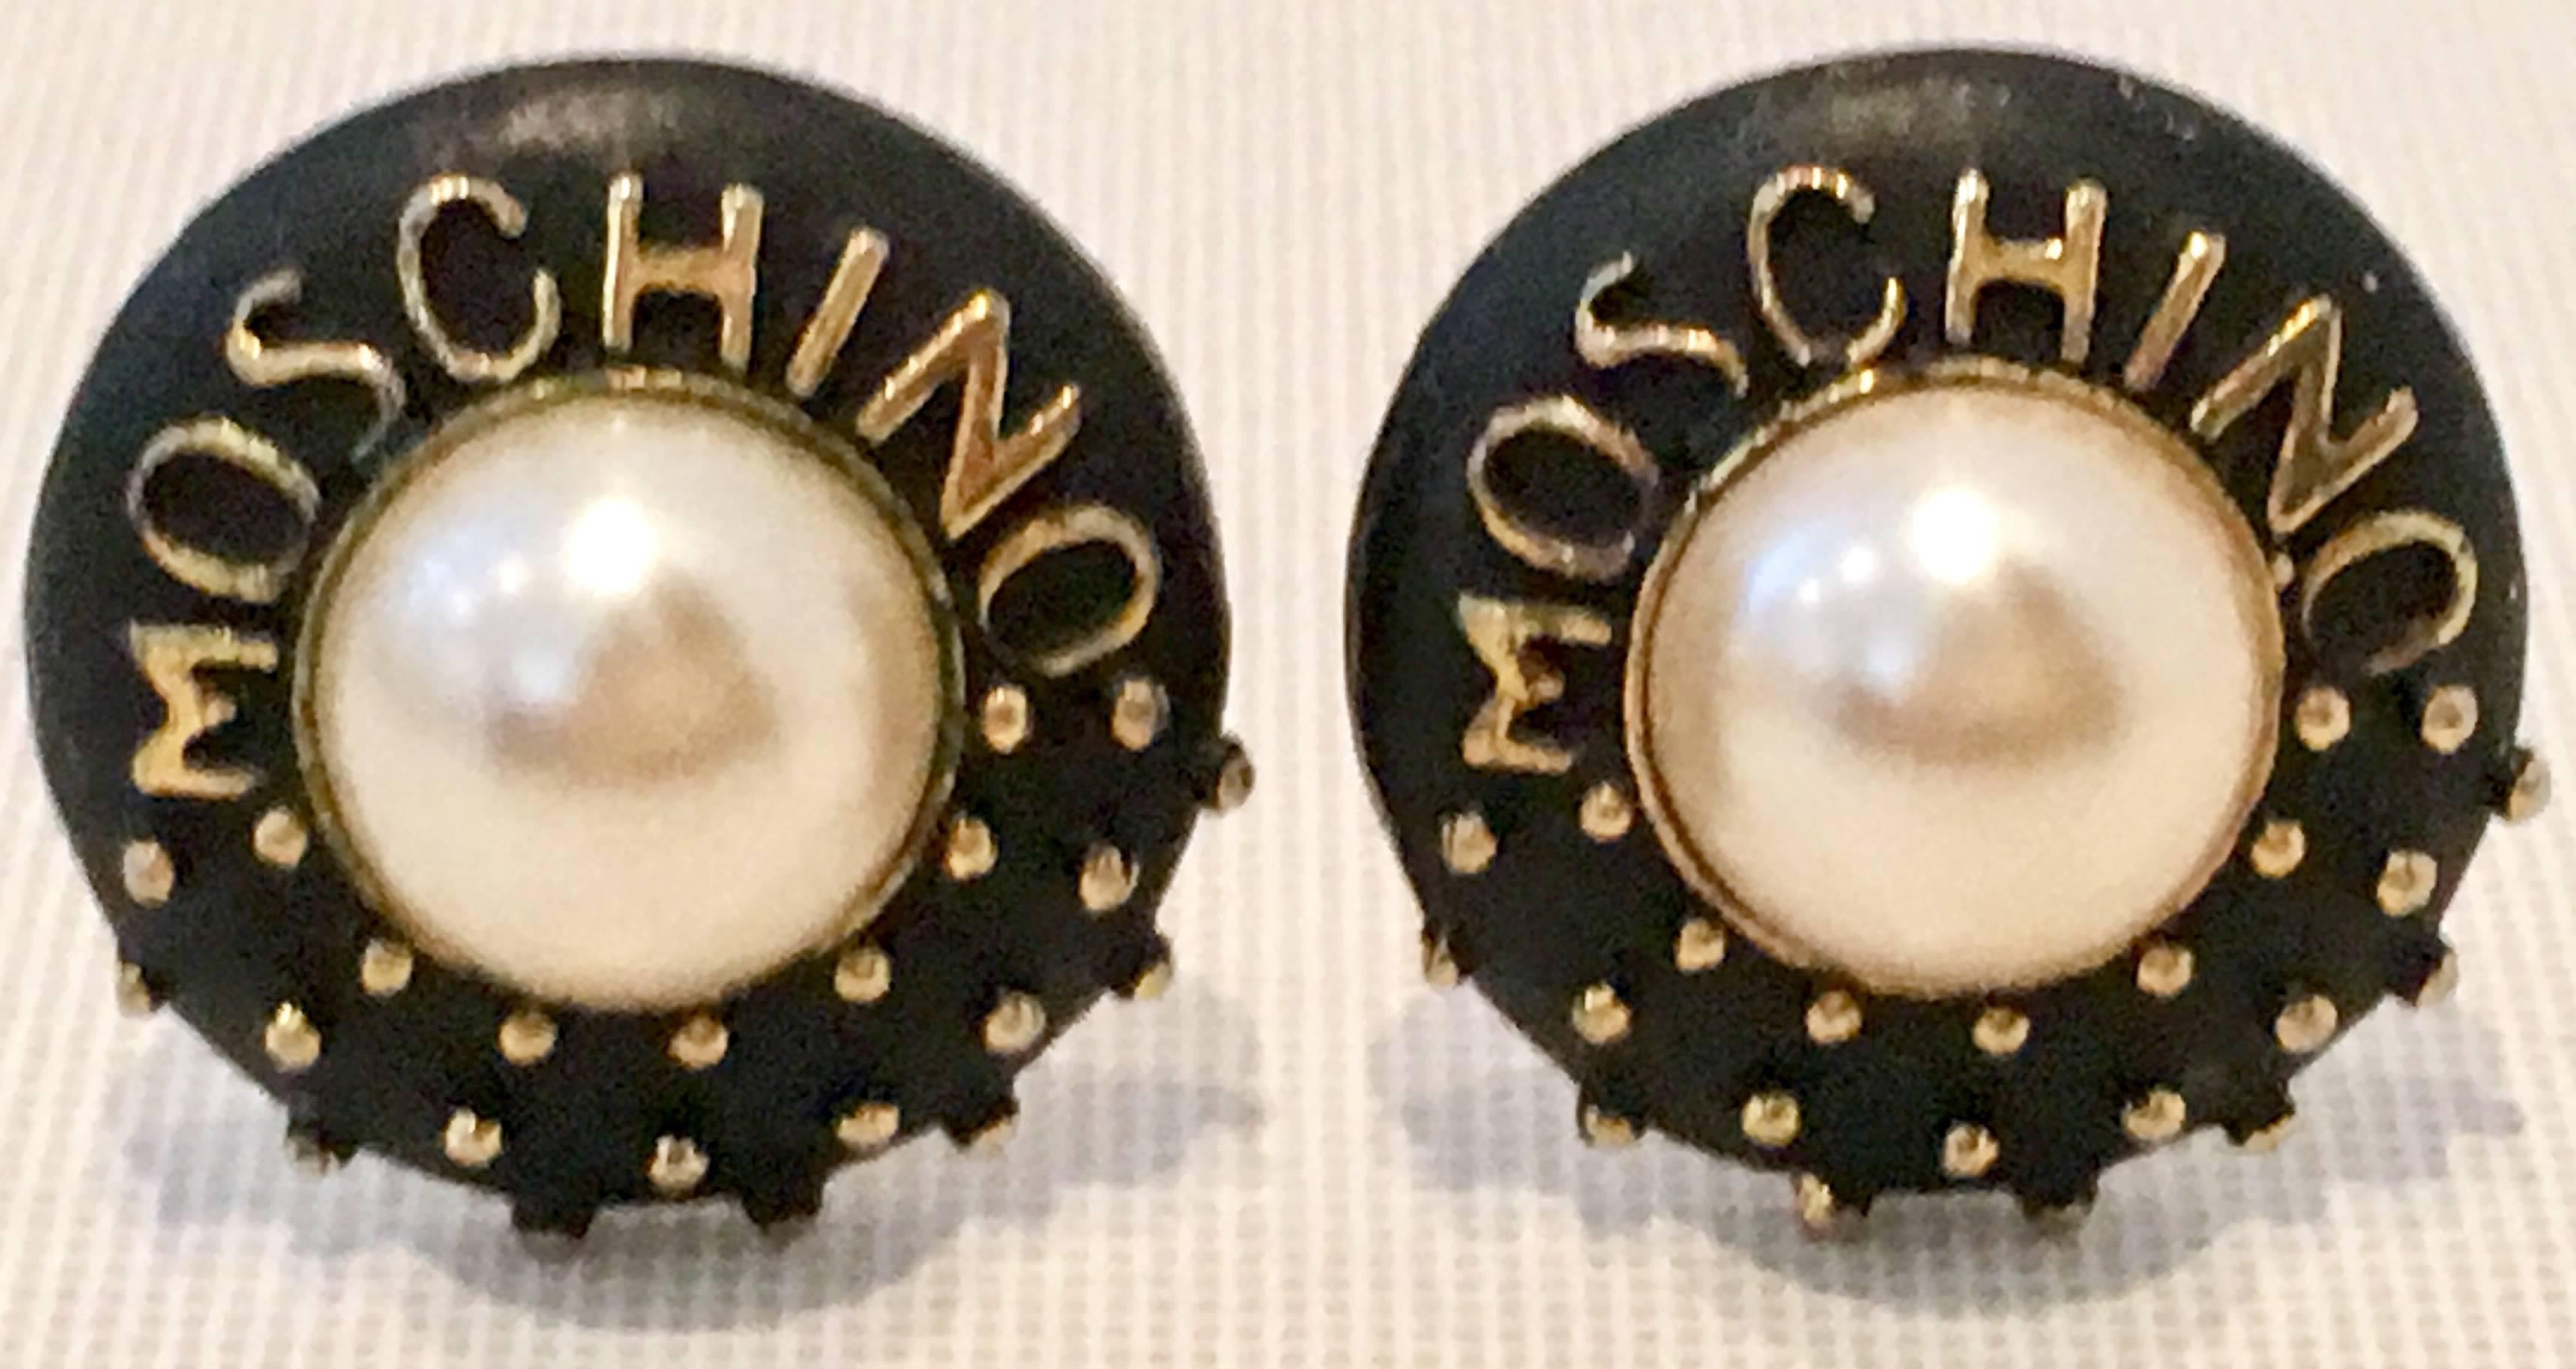 Rare 90'S Gold Plate Faux Pearl & Black Enamel Stud Moschino Logo Clip On Earrings. Central faux pearl is approximately .50